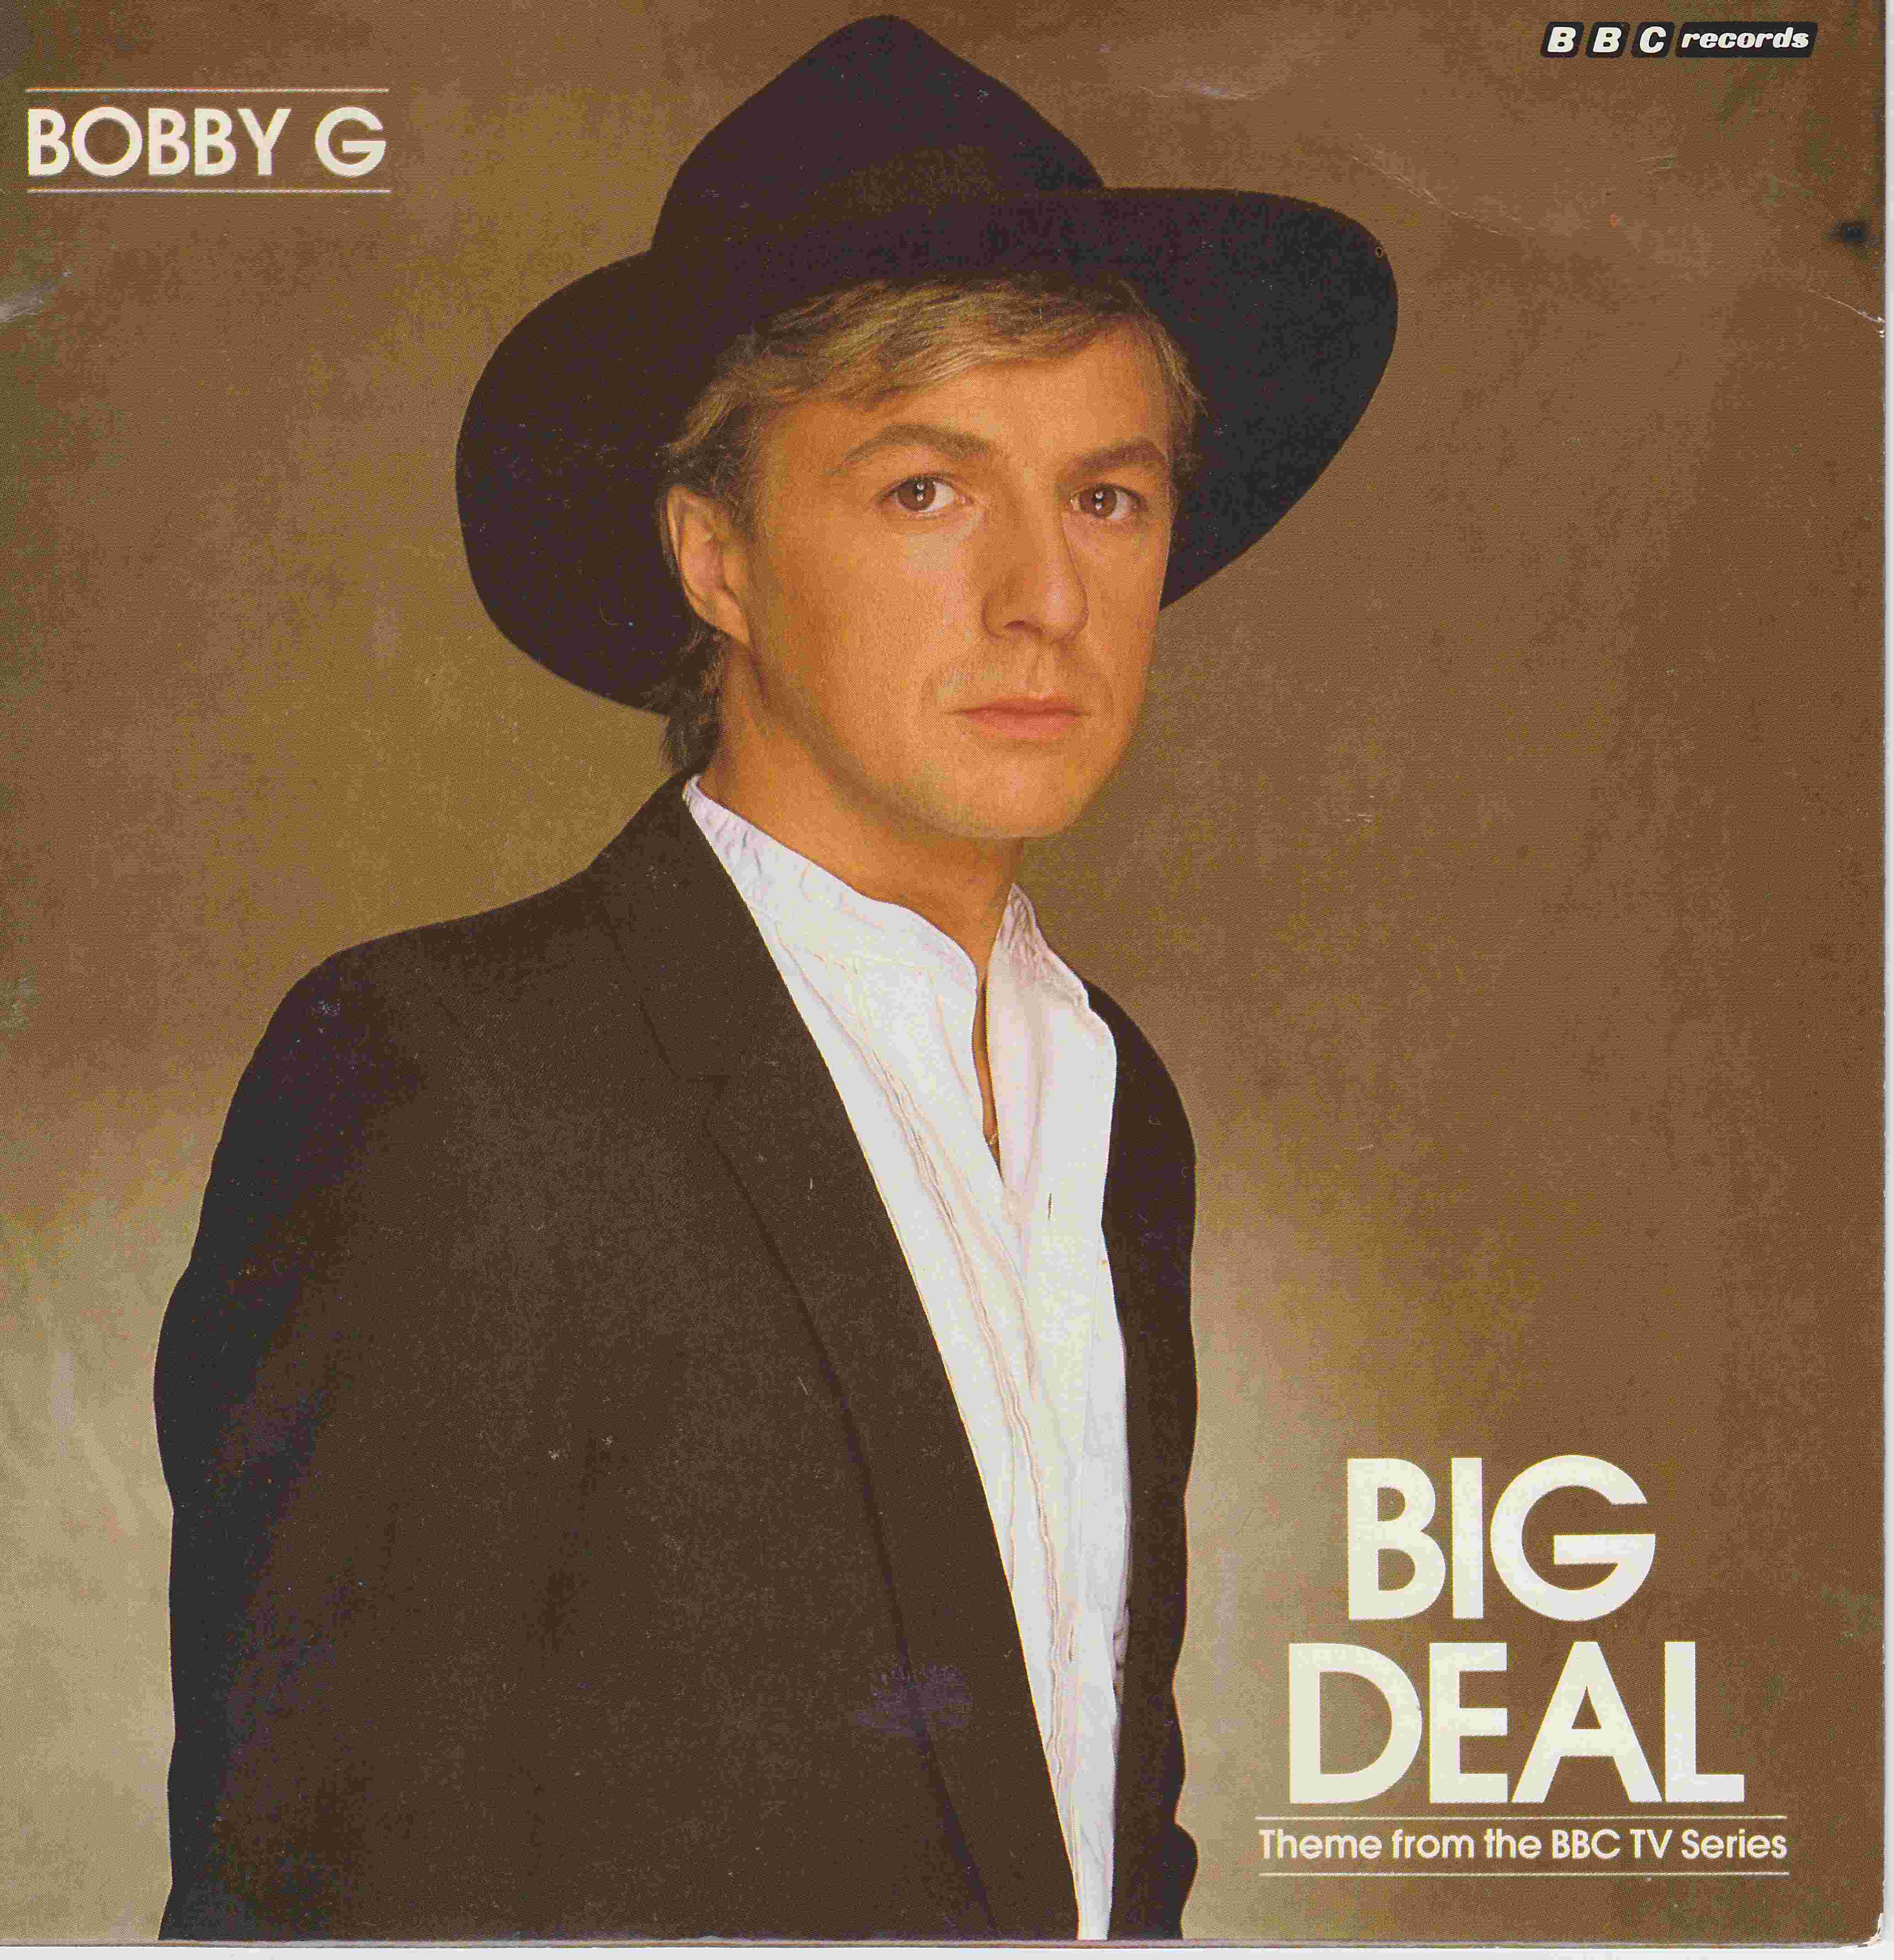 Picture of RESL 151 Big deal by artist Bobby G from the BBC singles - Records and Tapes library